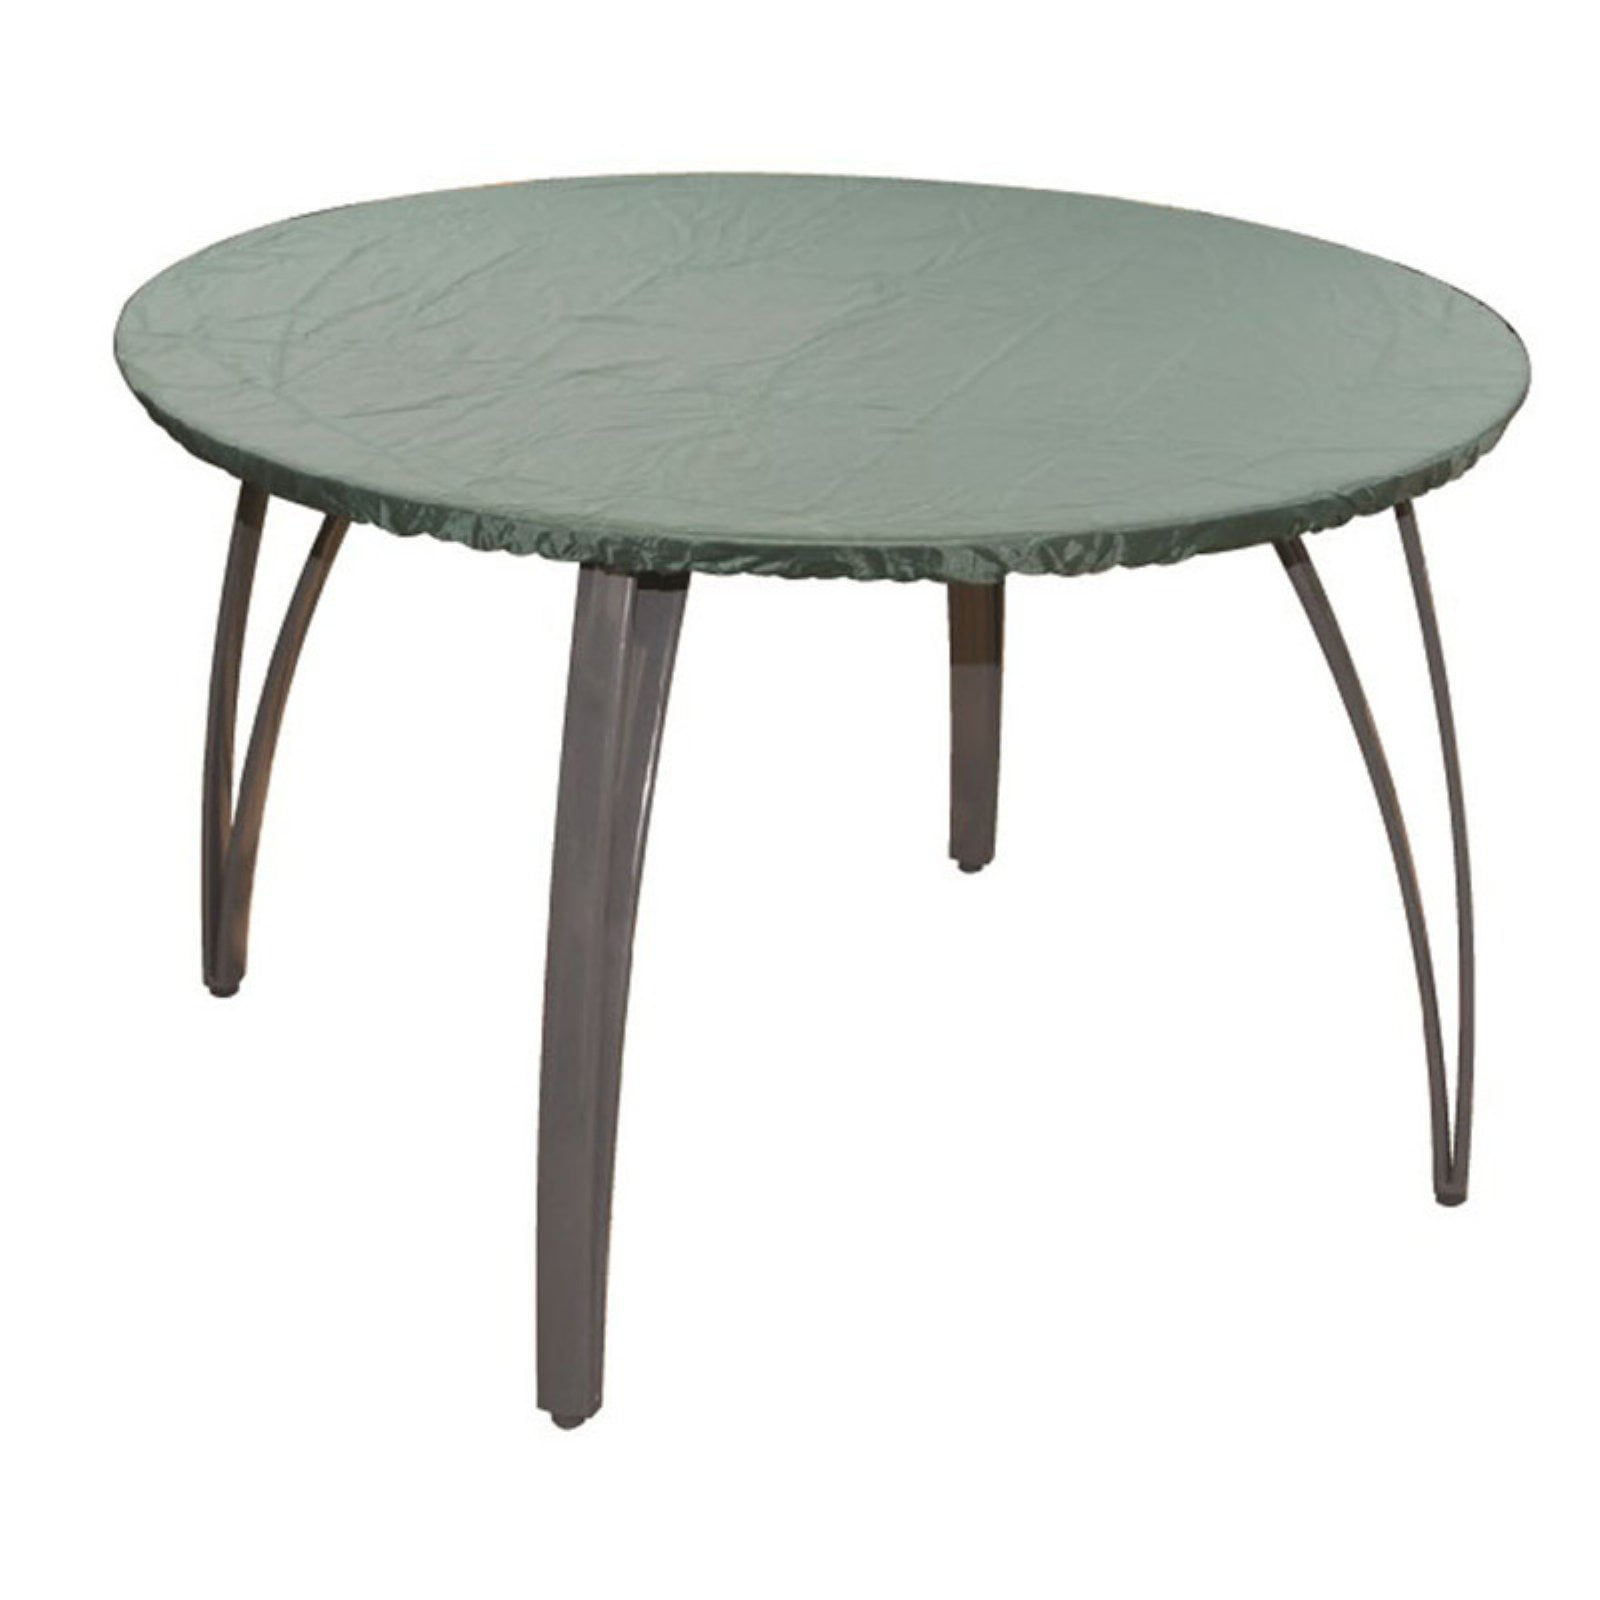 Outdoor Patio Dining Table Top Cover, Round Table Top Protector